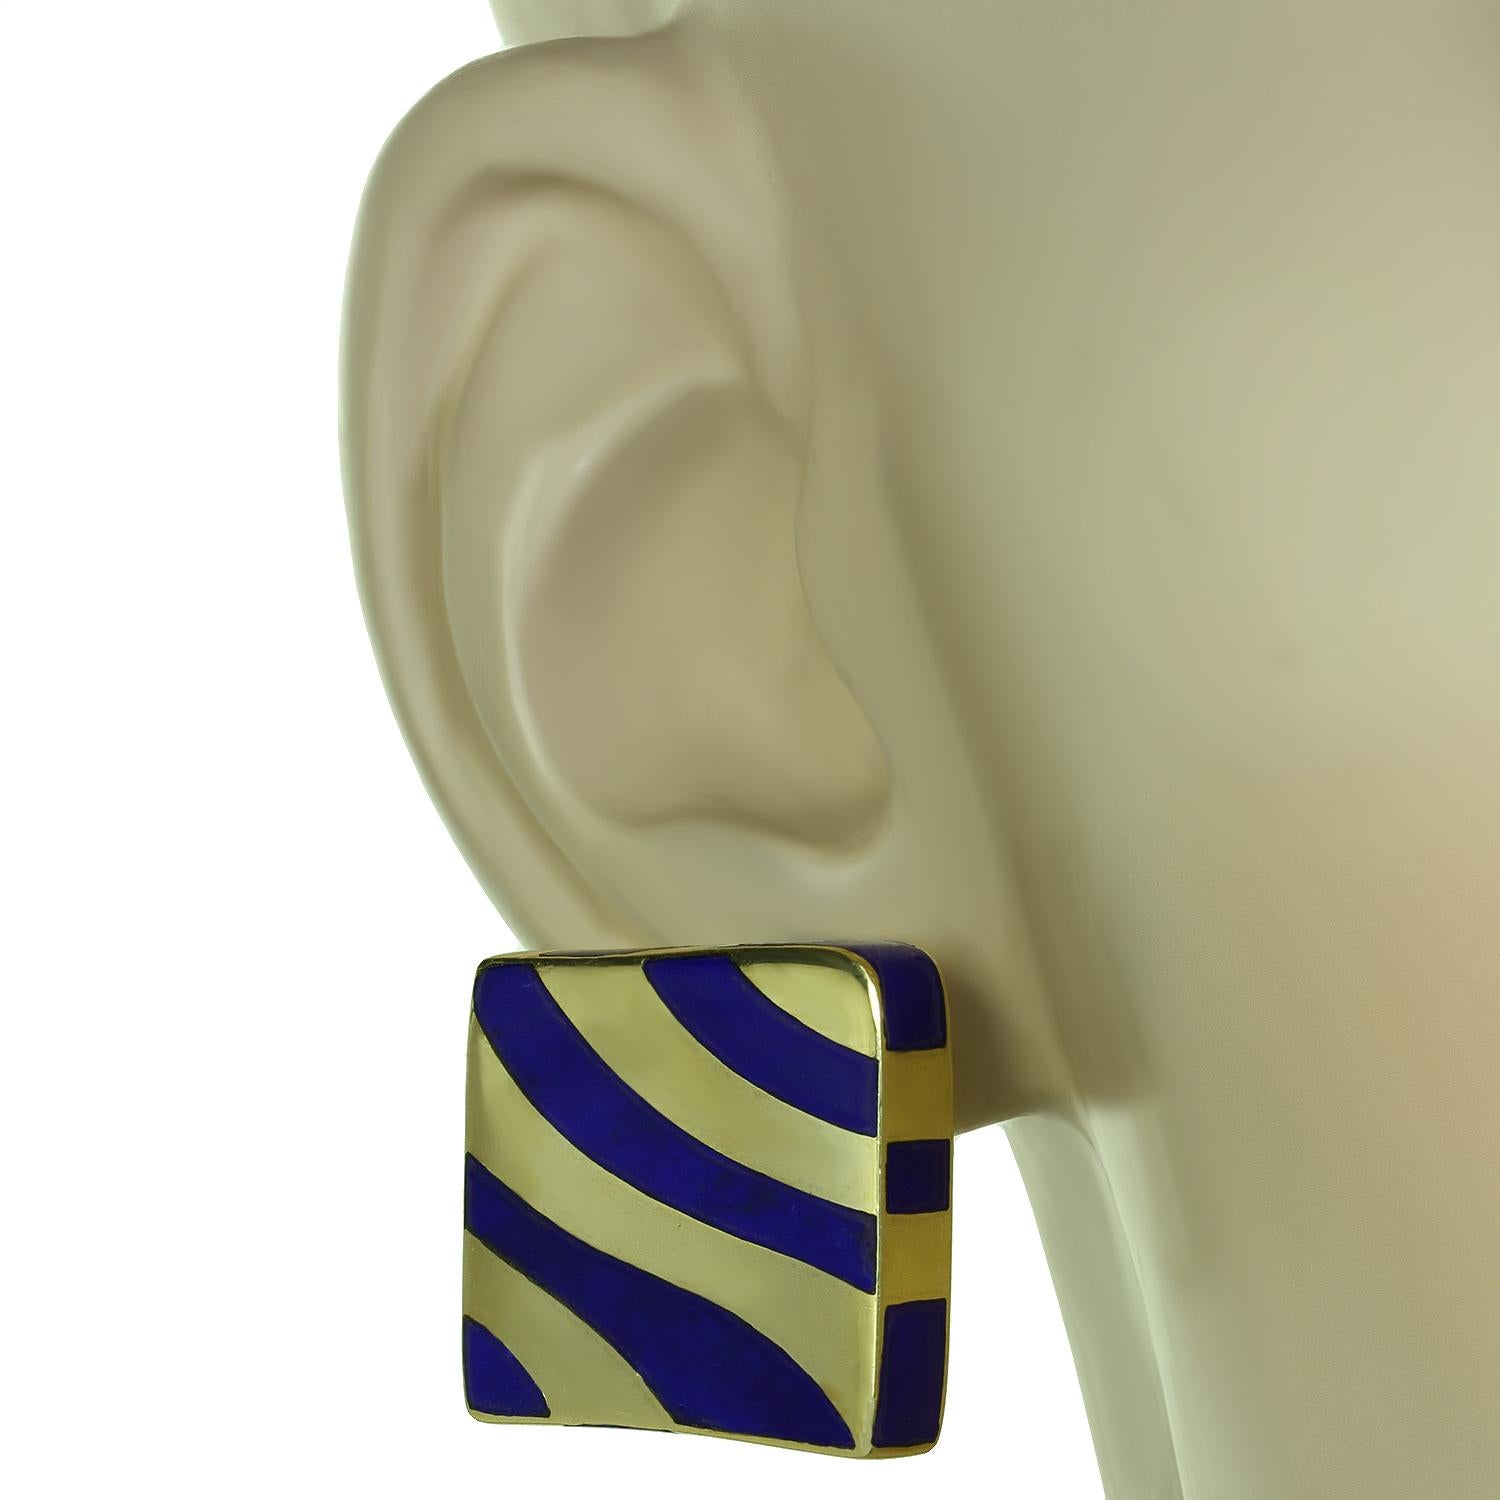 ANGELA CUMMINGS Striped Lapis Lazuli Yellow Gold Earrings In Excellent Condition For Sale In New York, NY